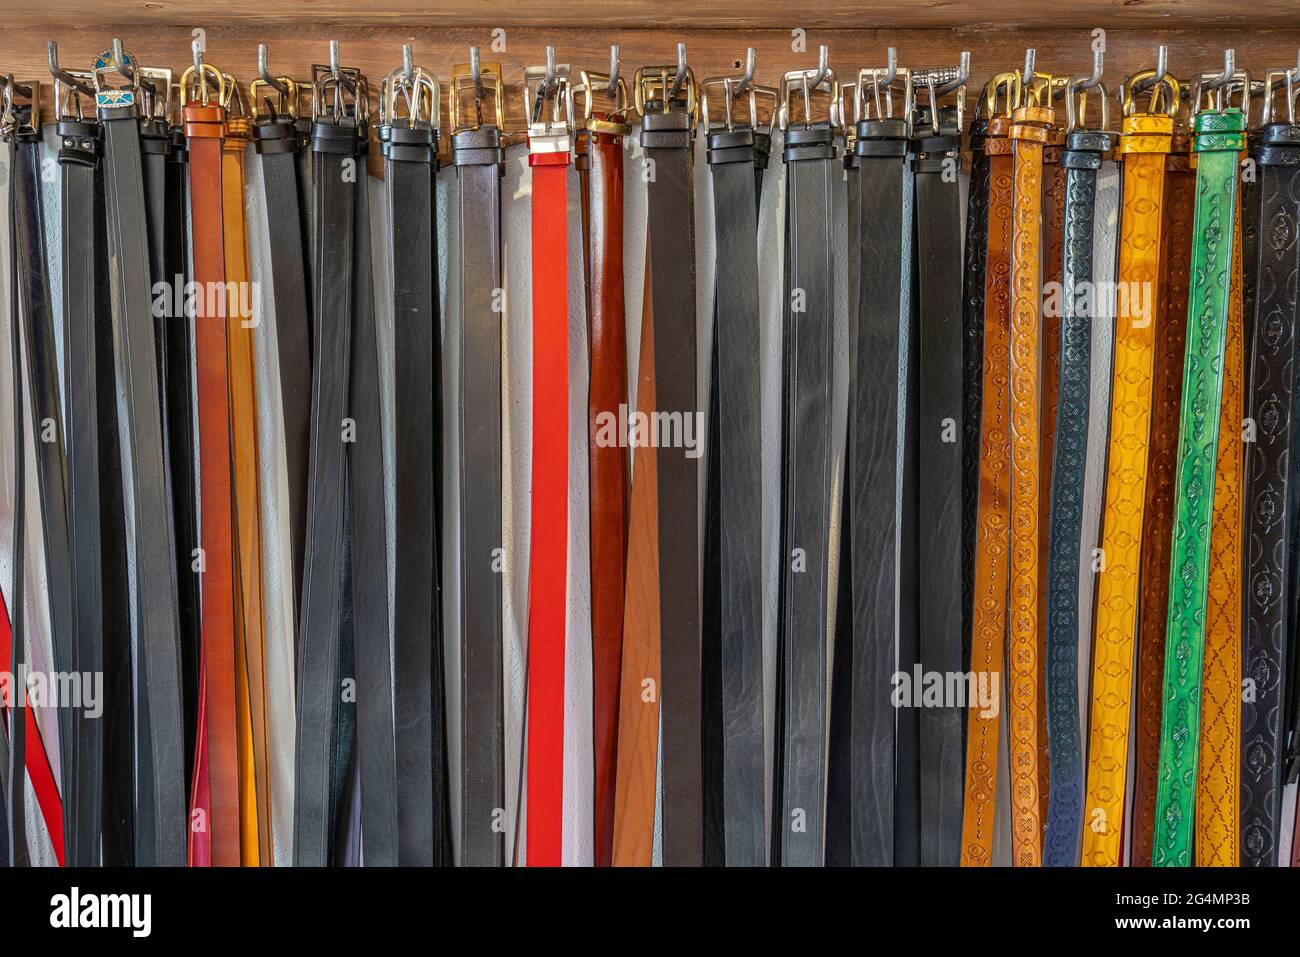 Handmade leather belts by a leather craftsman displayed for sale. Isernia, Molise, Italy, Europe Stock Photo